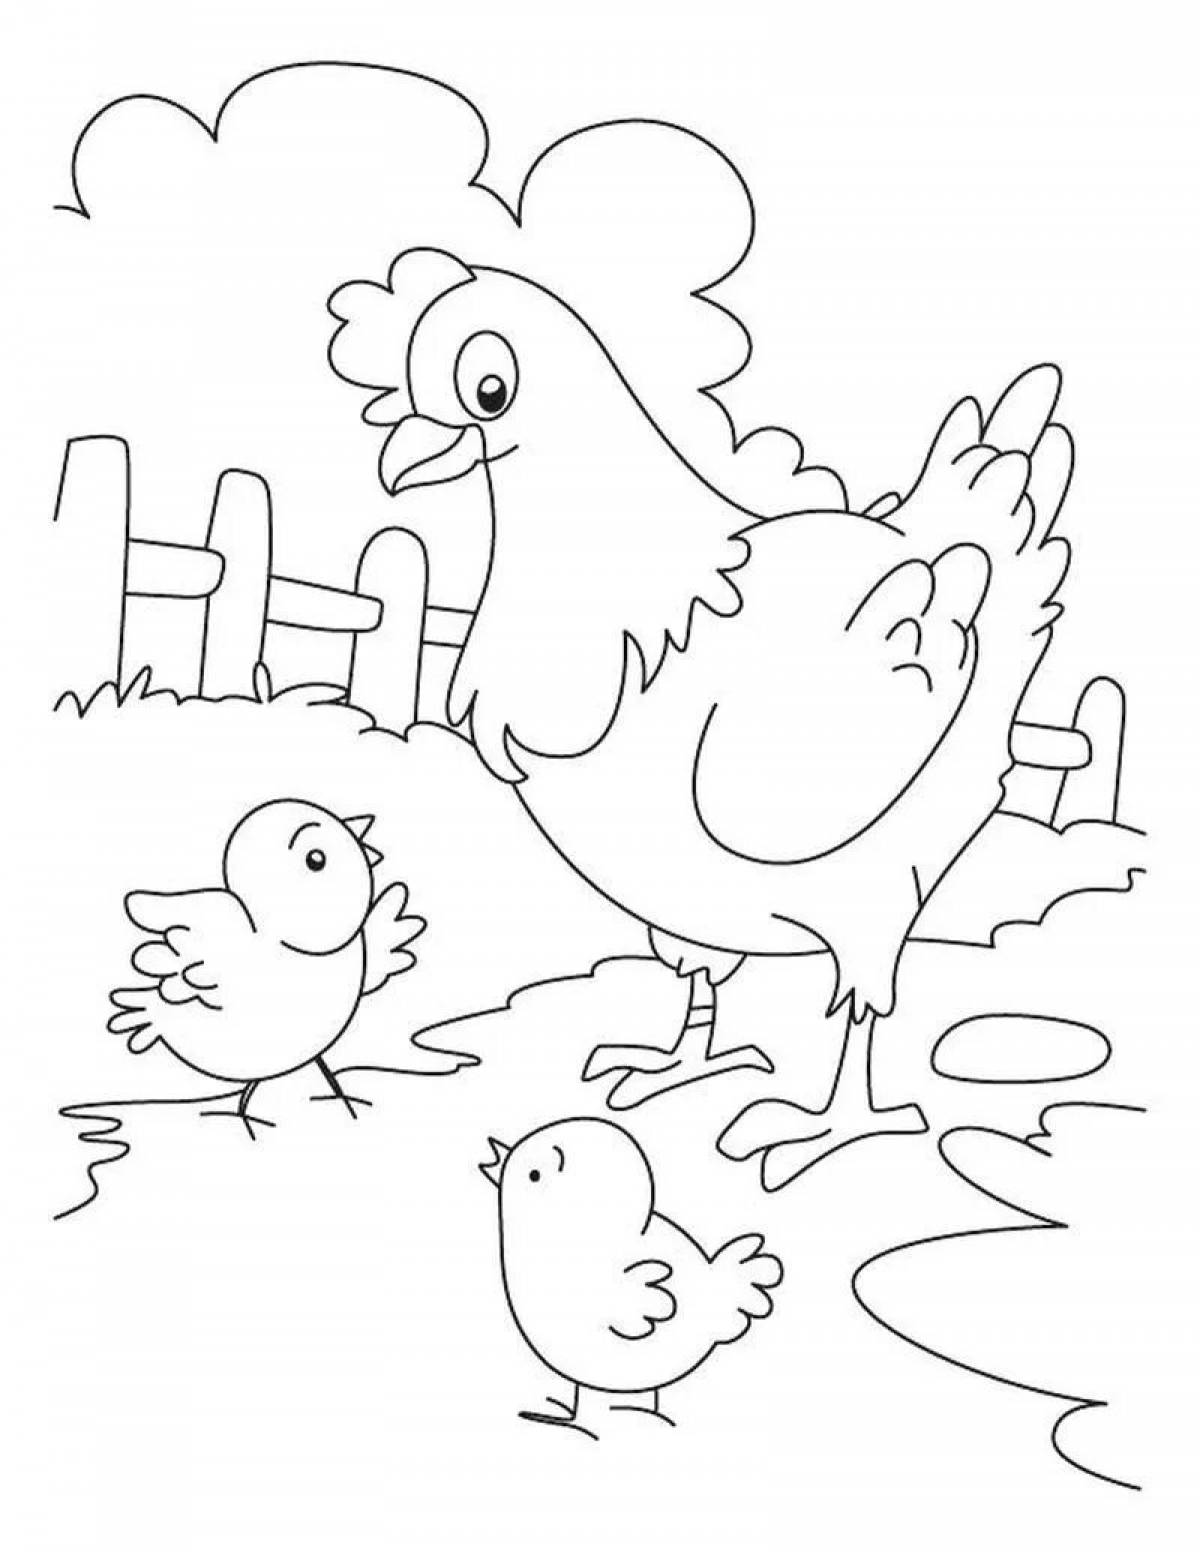 Rampant chickens coloring pages for kids